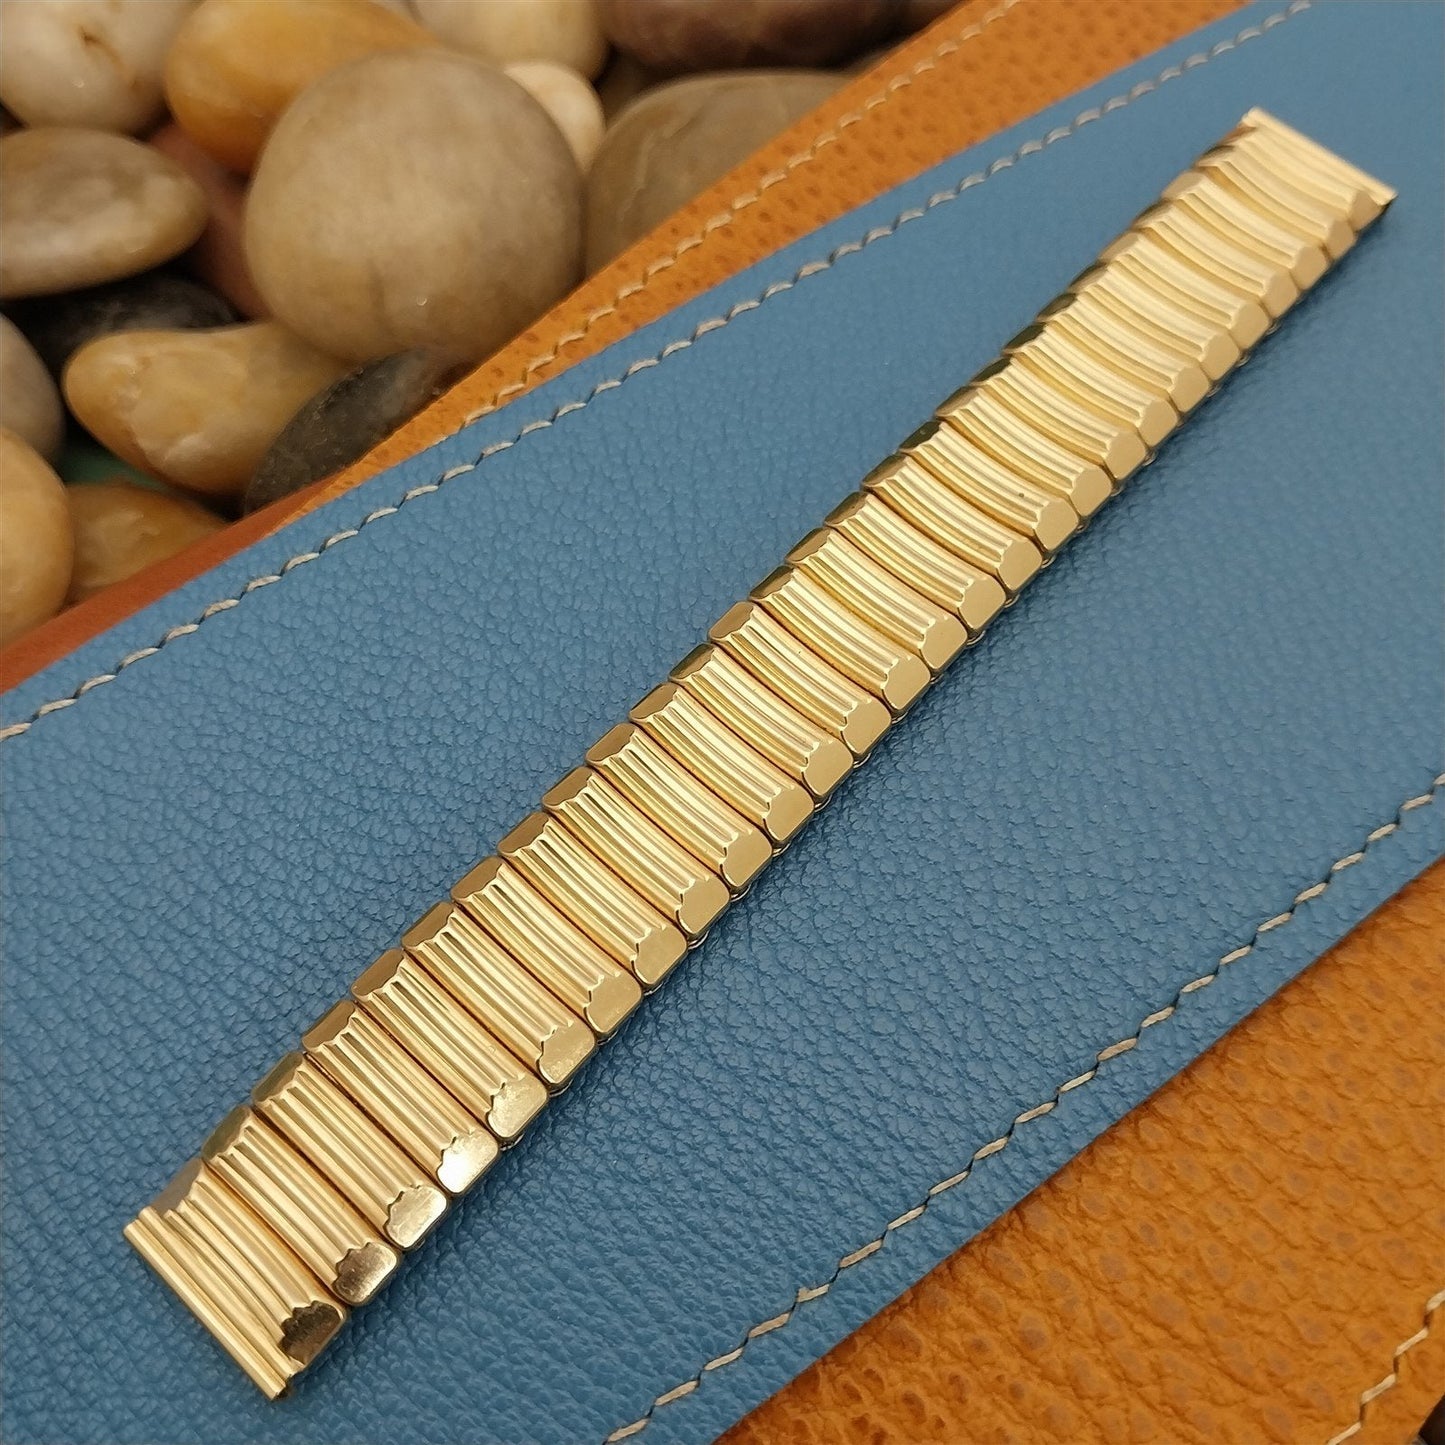 5/8" 12k Gold-Filled Classic JB Champion USA nos 1950s Vintage Watch Band